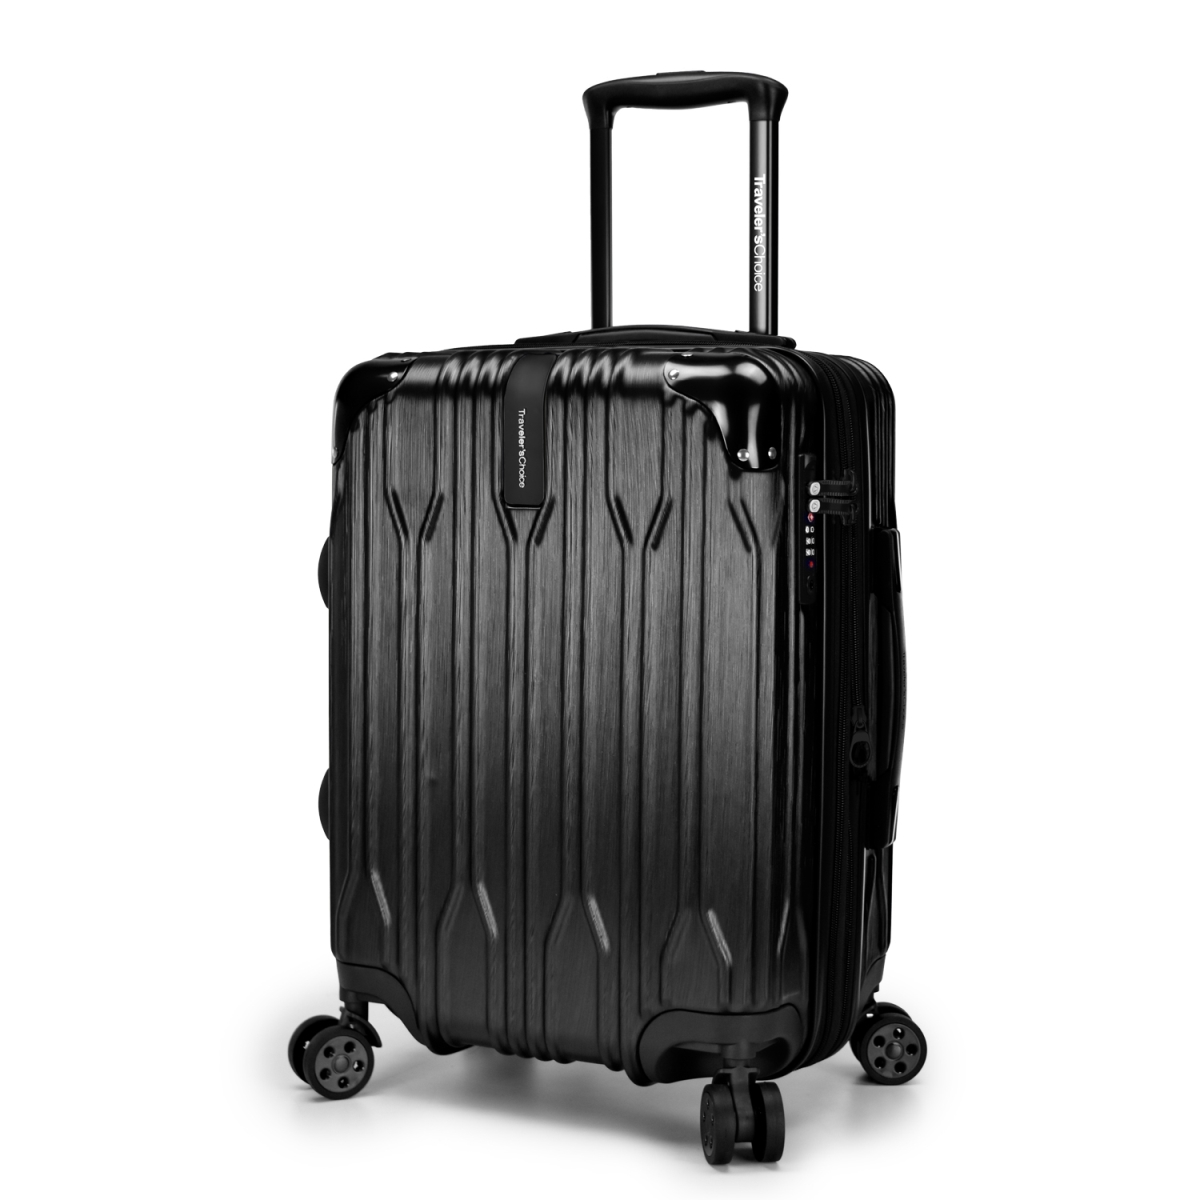 Travelers Choice Tc09035k20 Bell Weather Expandable 20 In. Spinner Luggage, Black